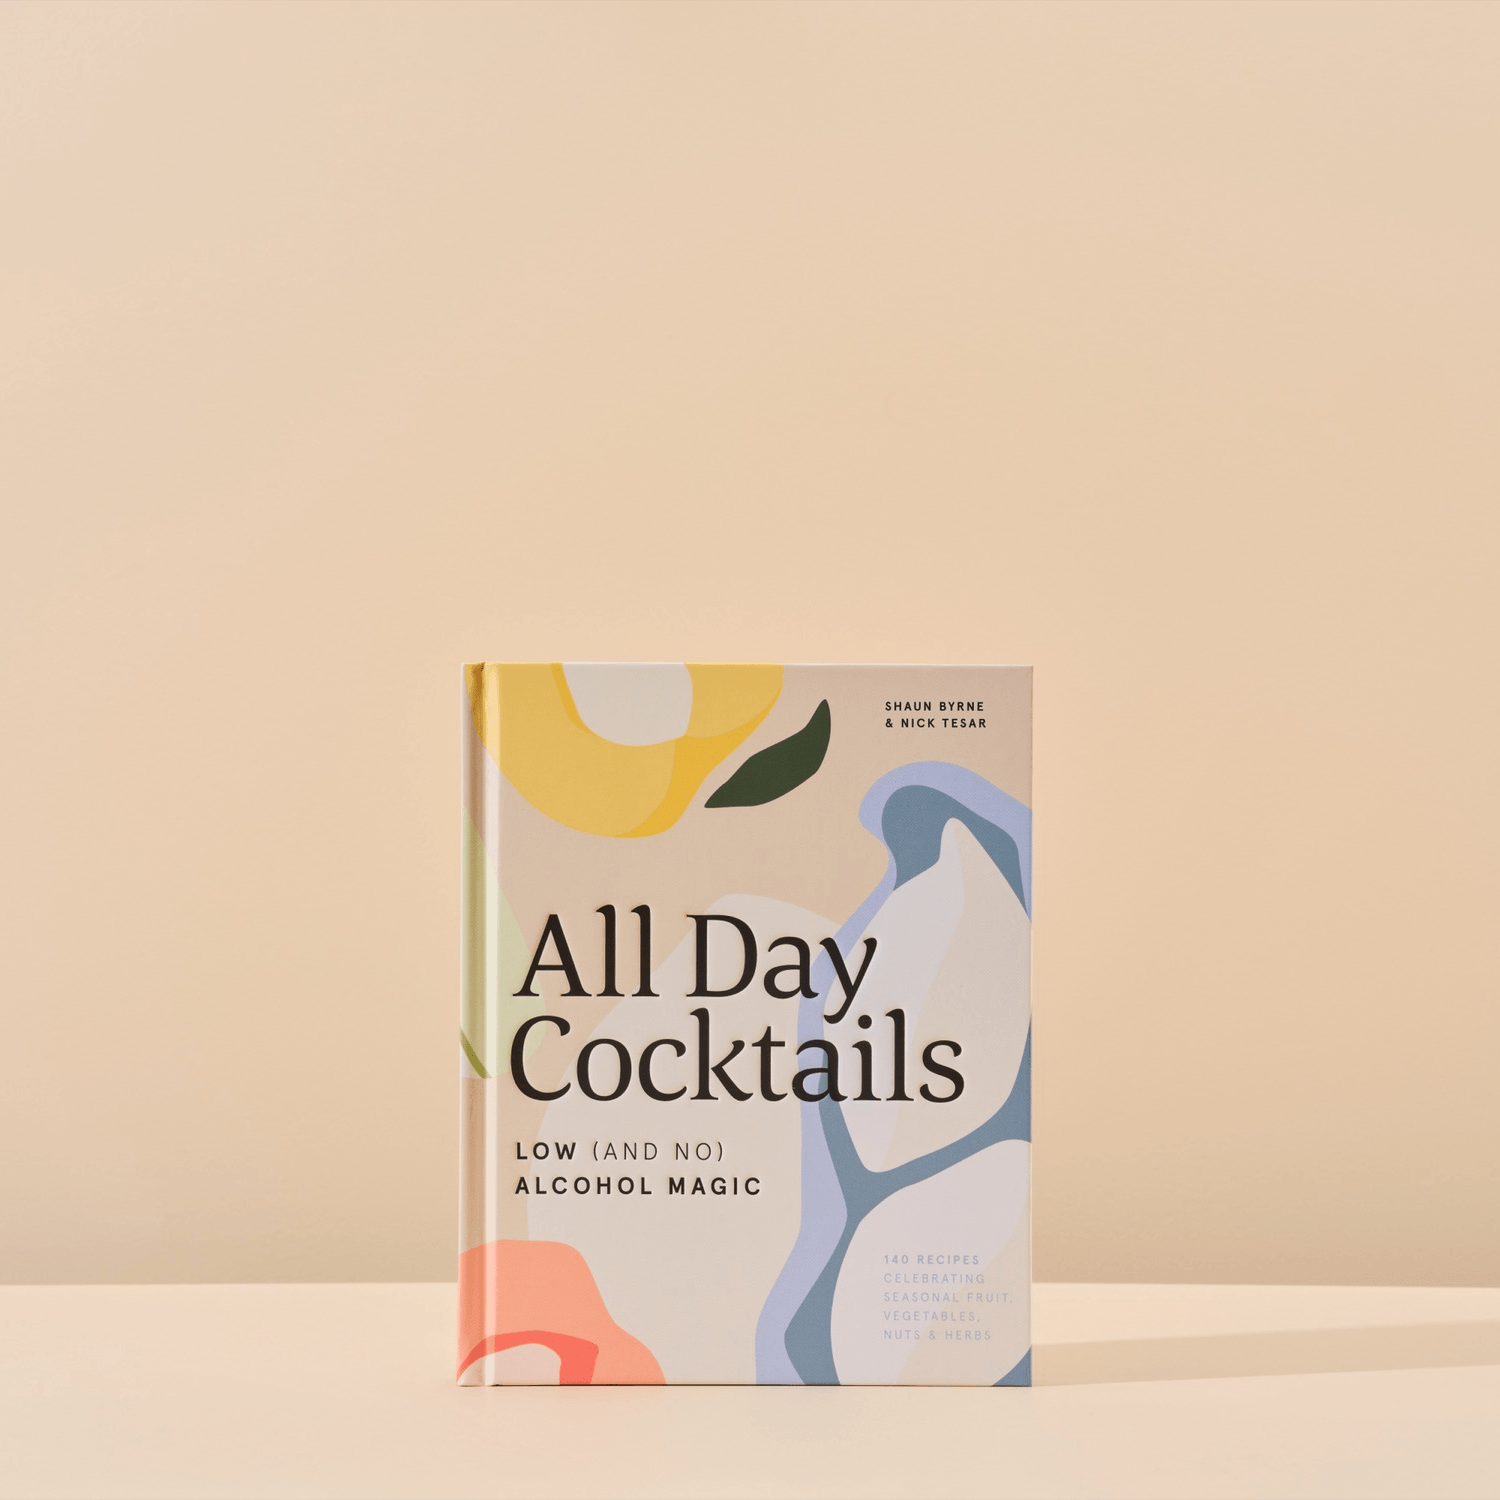 All Day Cocktails book cover